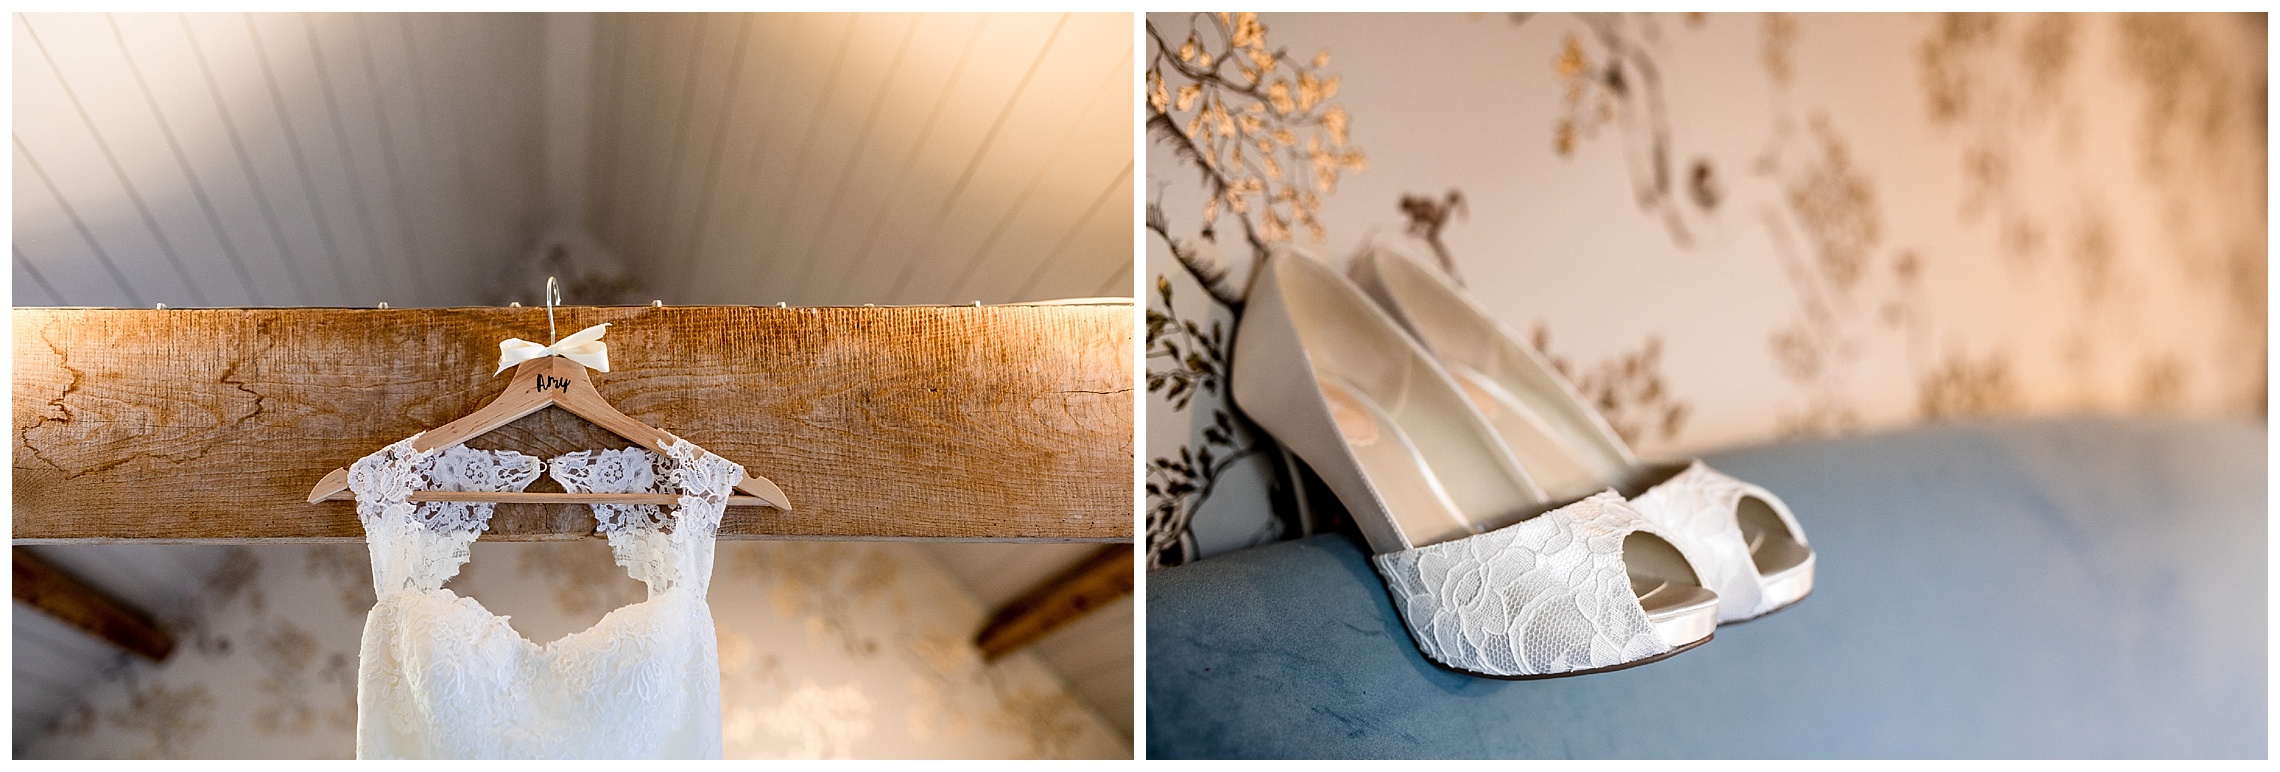 wedding dress and wedding shoes at south farm